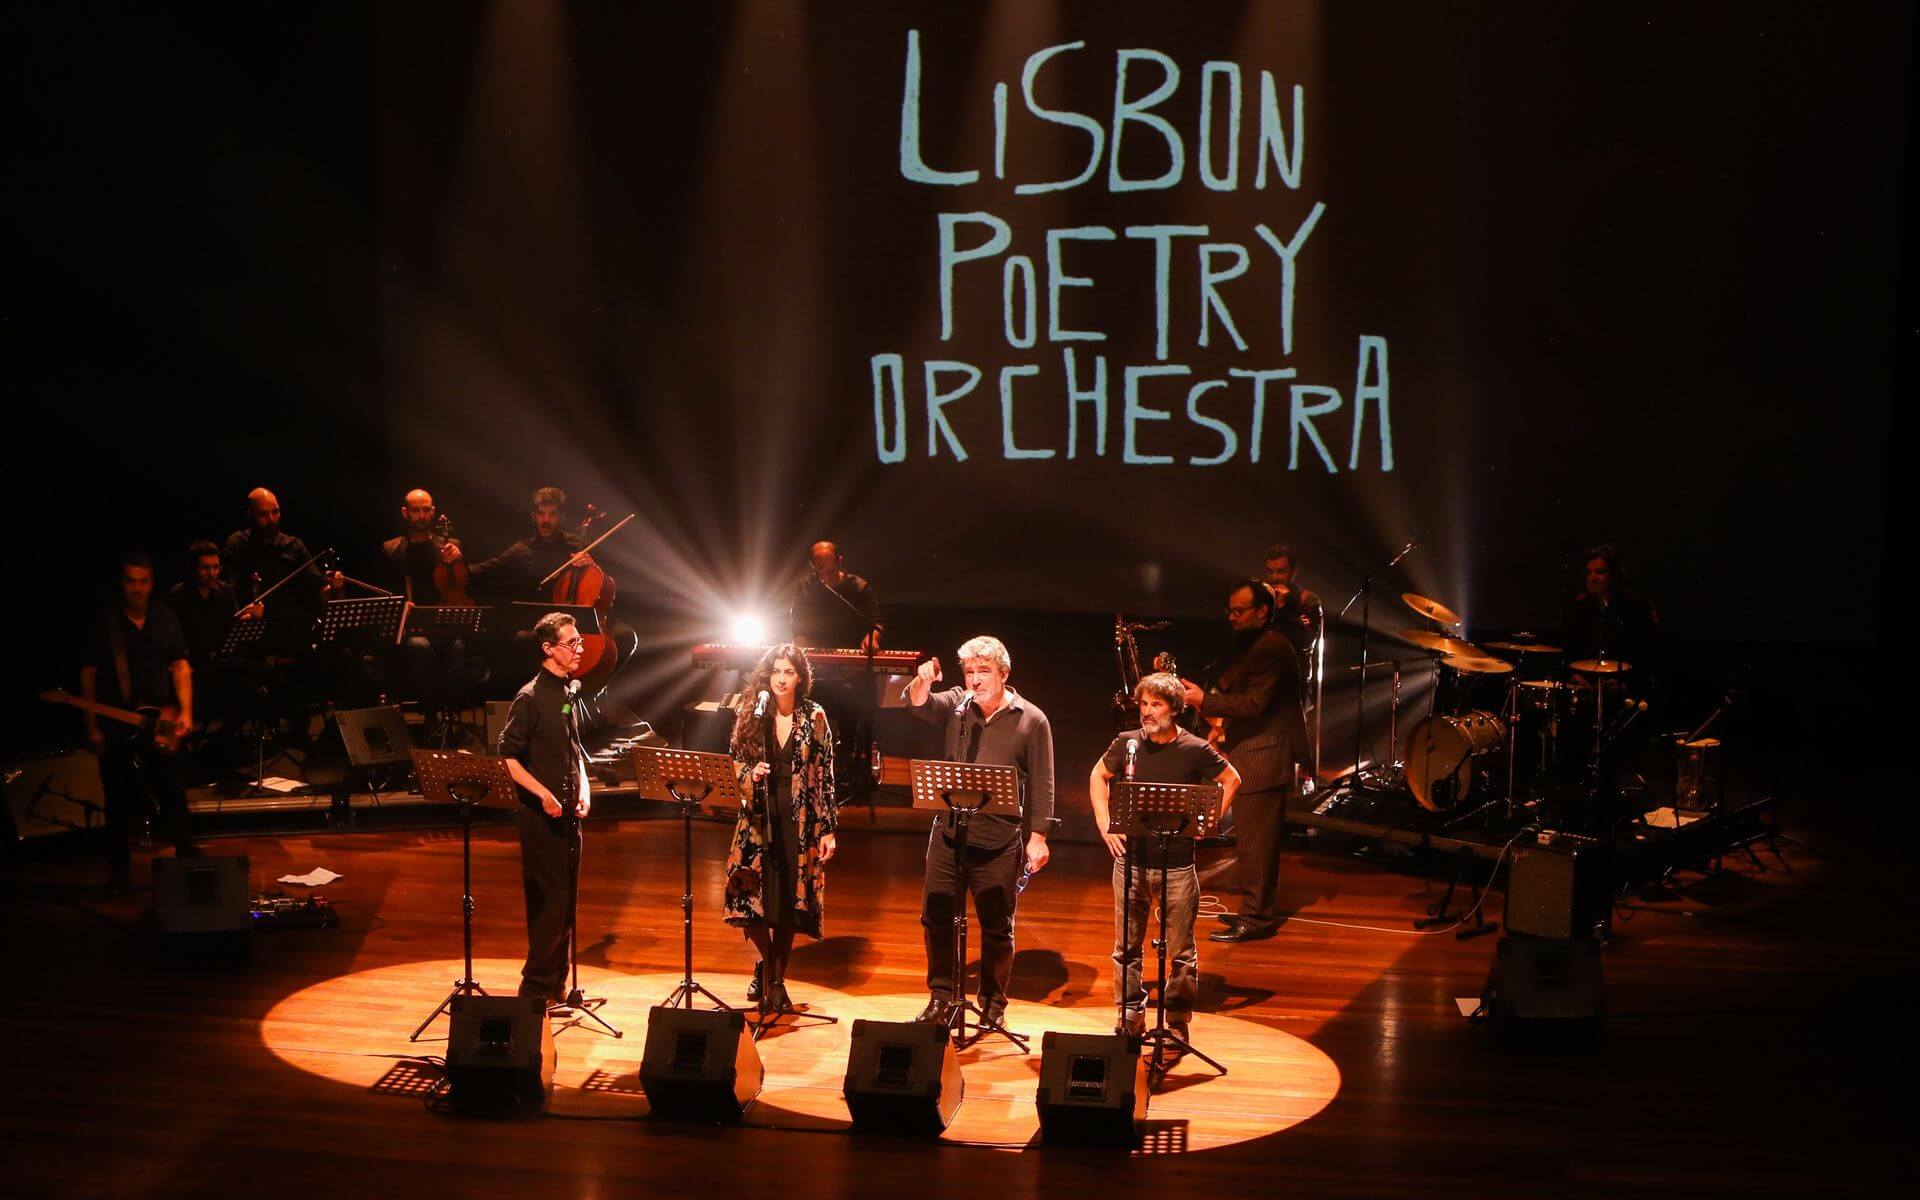 Lisbon Poetry Orchestra